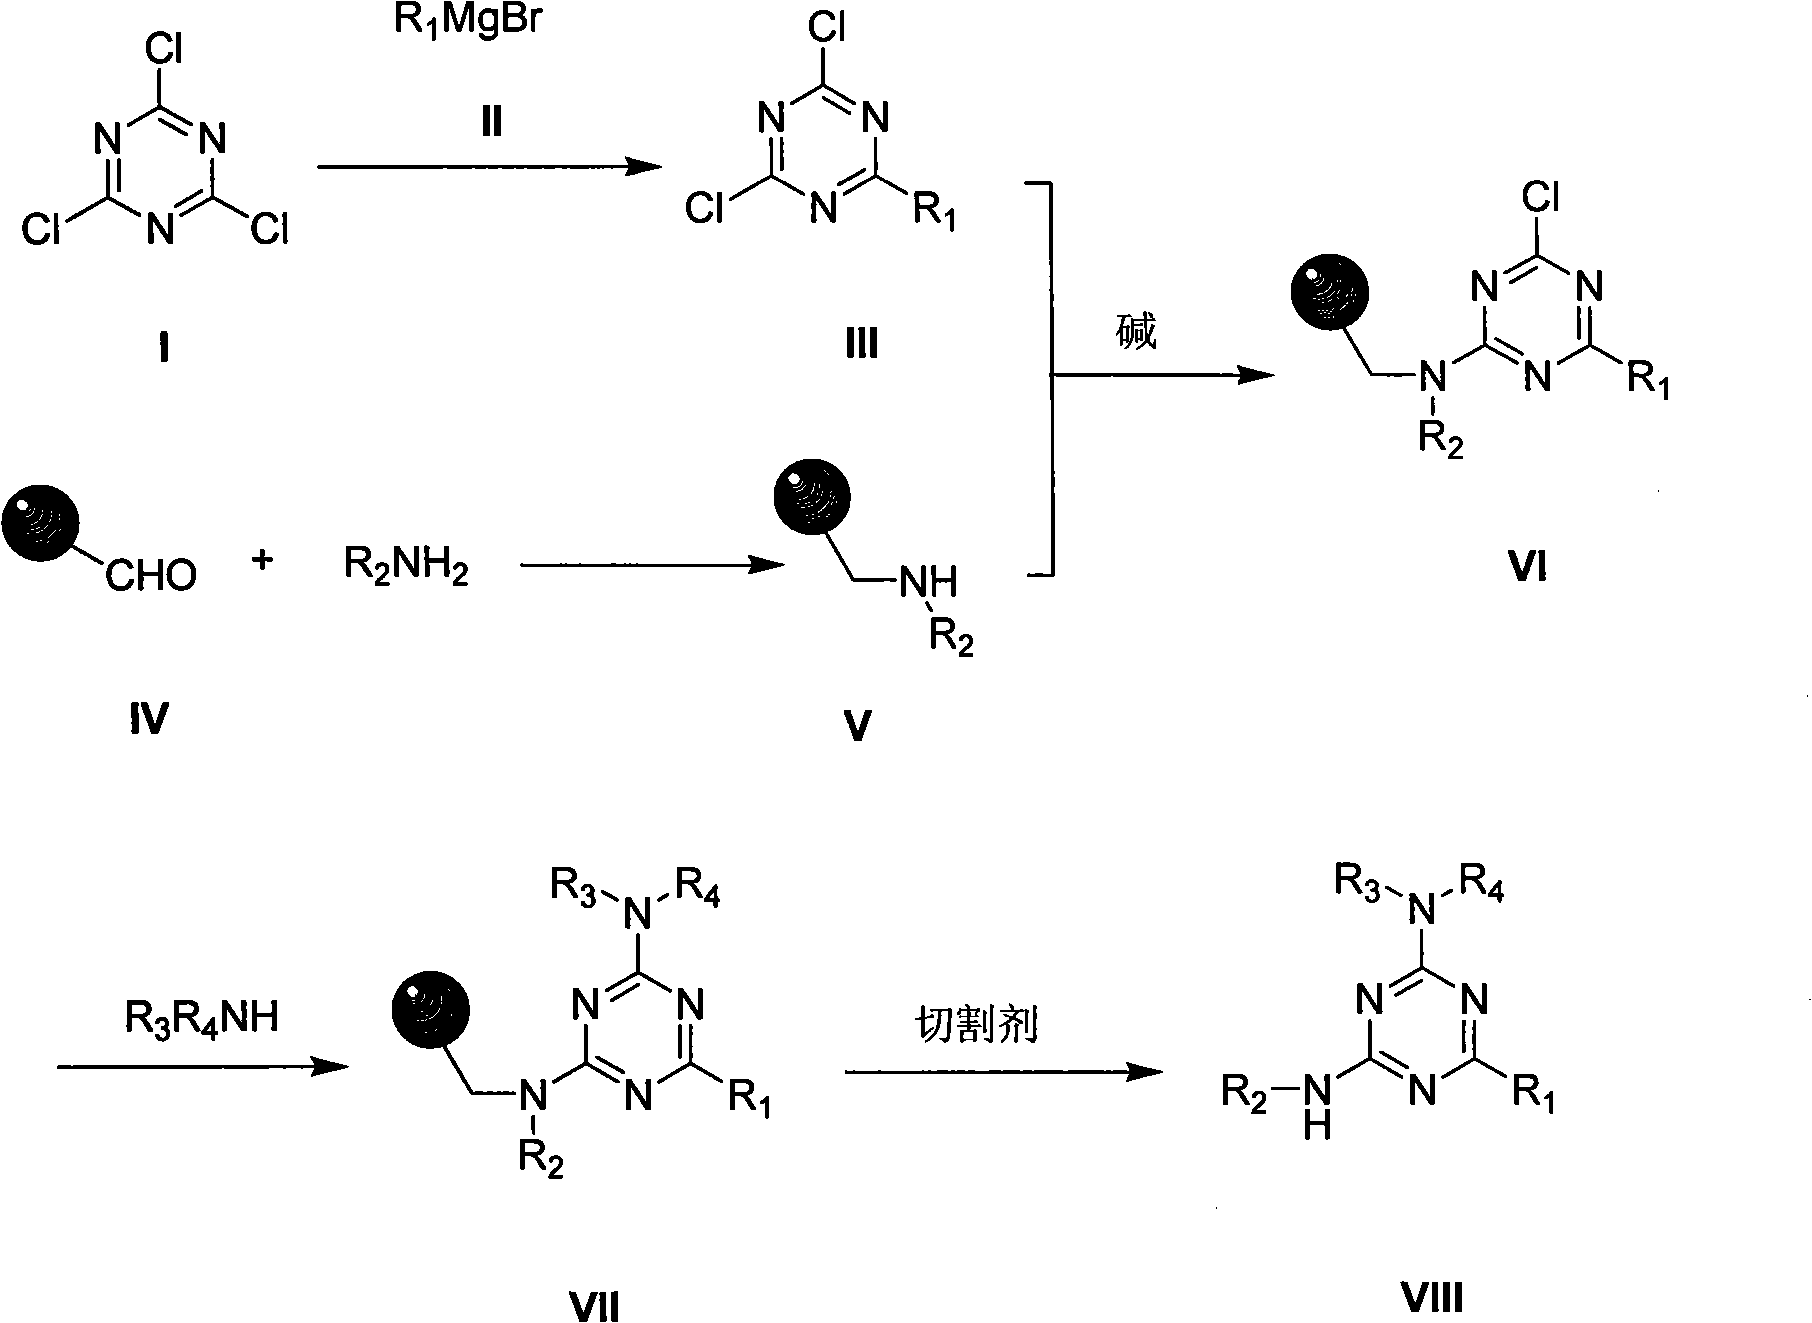 2,4,6-tri-substituted-1,3,5-triazine derivates library and preparation method